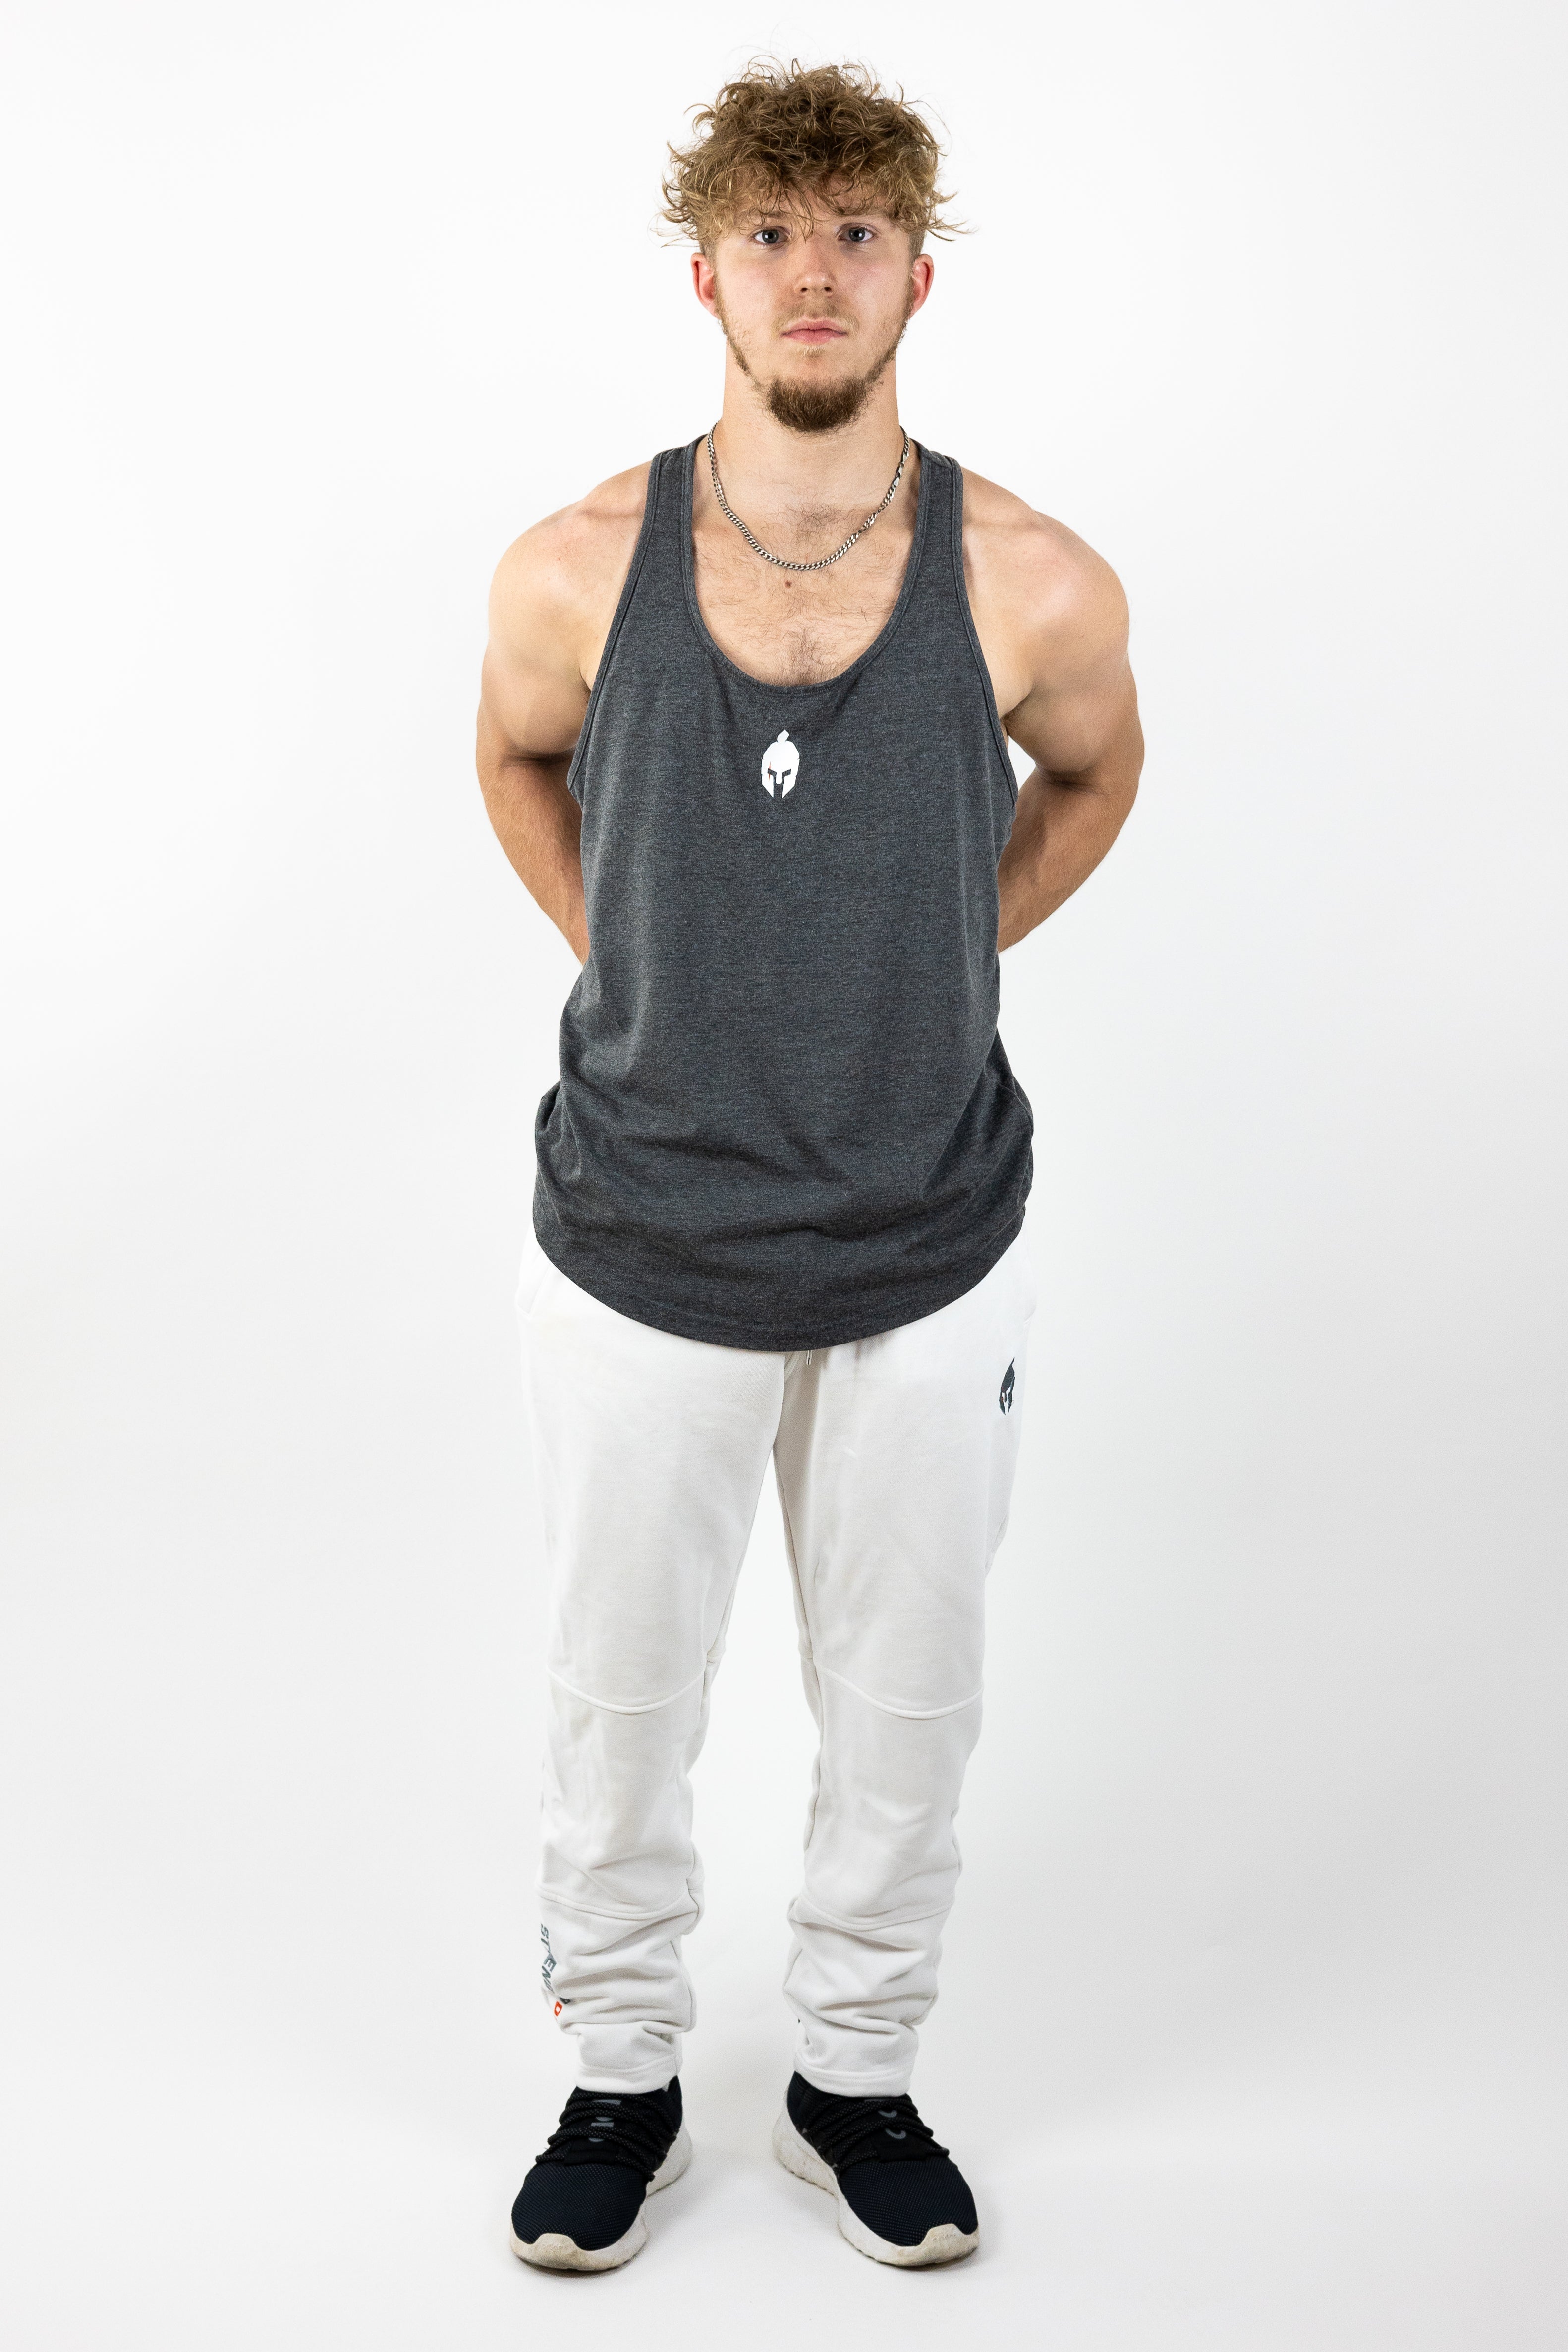 Man wearing gray stringer and white sweatpants posed with hands behind back